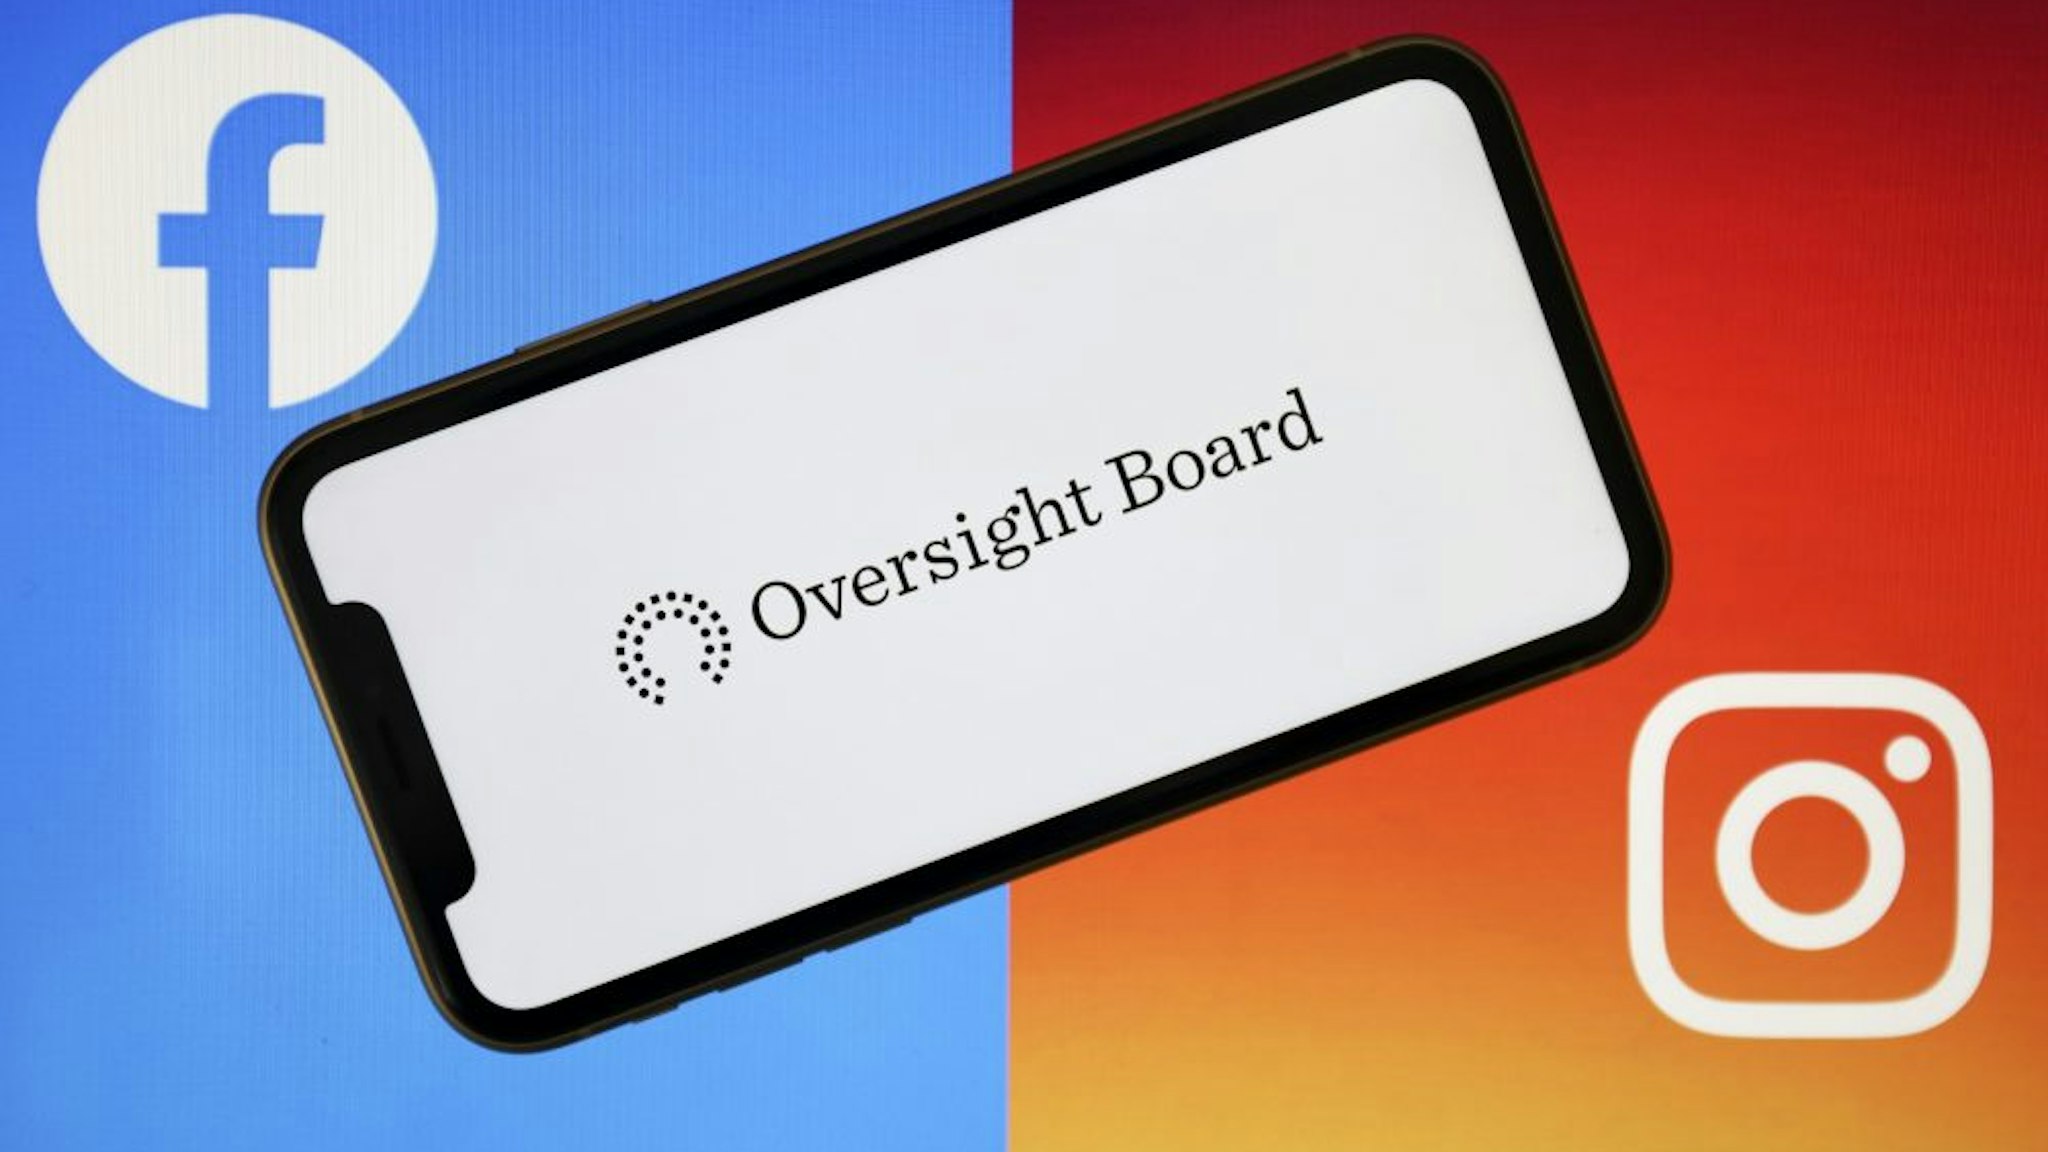 ANKARA, TURKEY - MAY 07: Oversight Board logo is seen on a smart phone with Facebook and Instagram logos at the background in Ankara, Turkey on May 07, 2020.